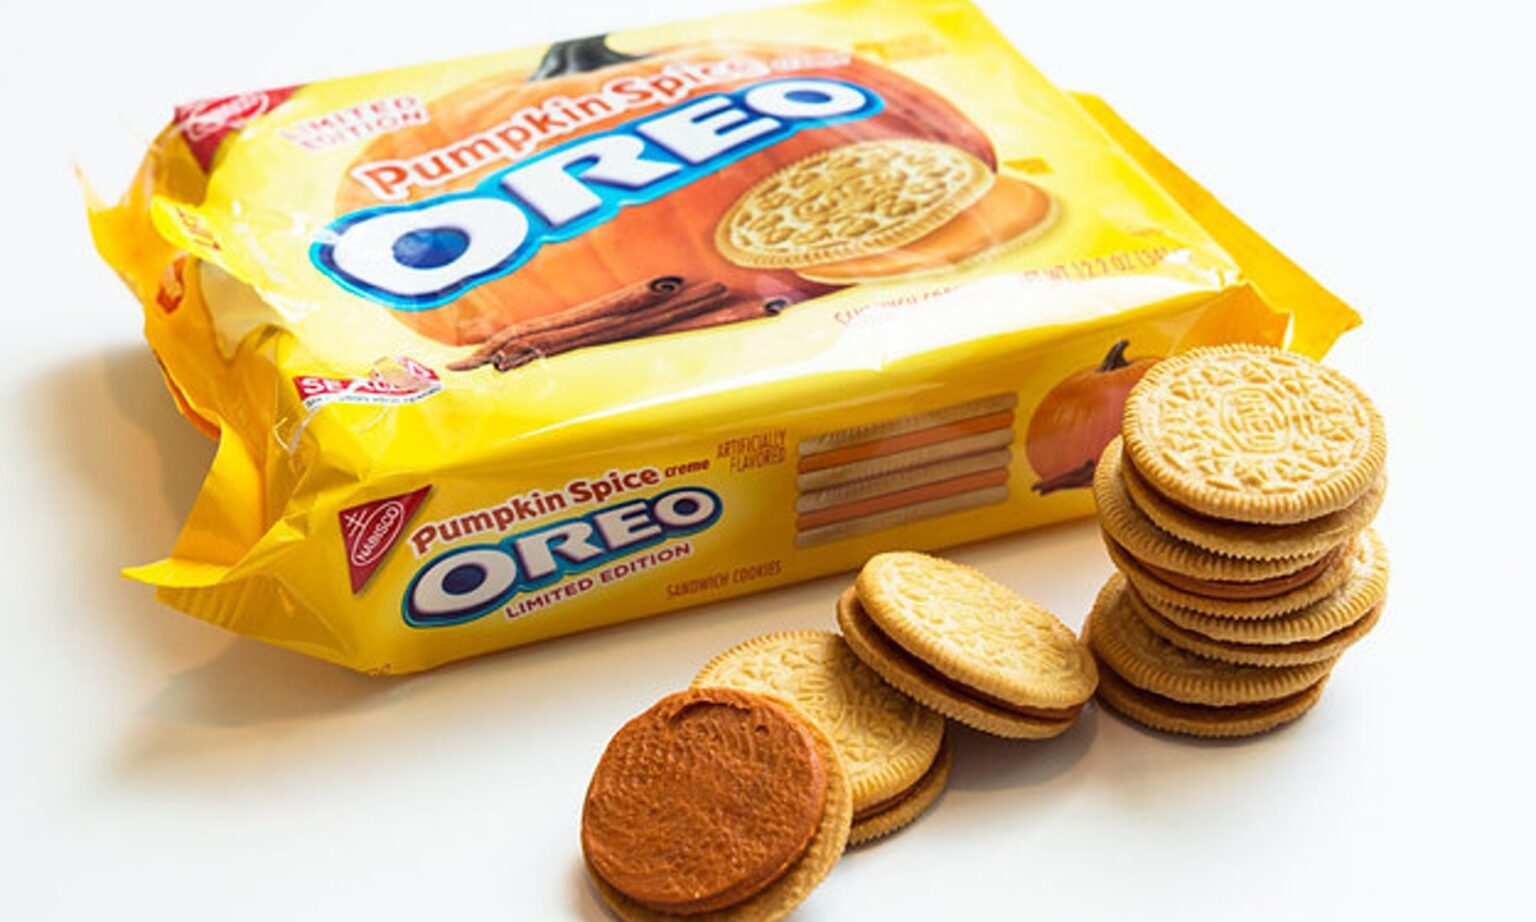 Oreo has been known to create some odd flavors over the years, but we really need to talk about just how many weird ingredients they've tried to use.